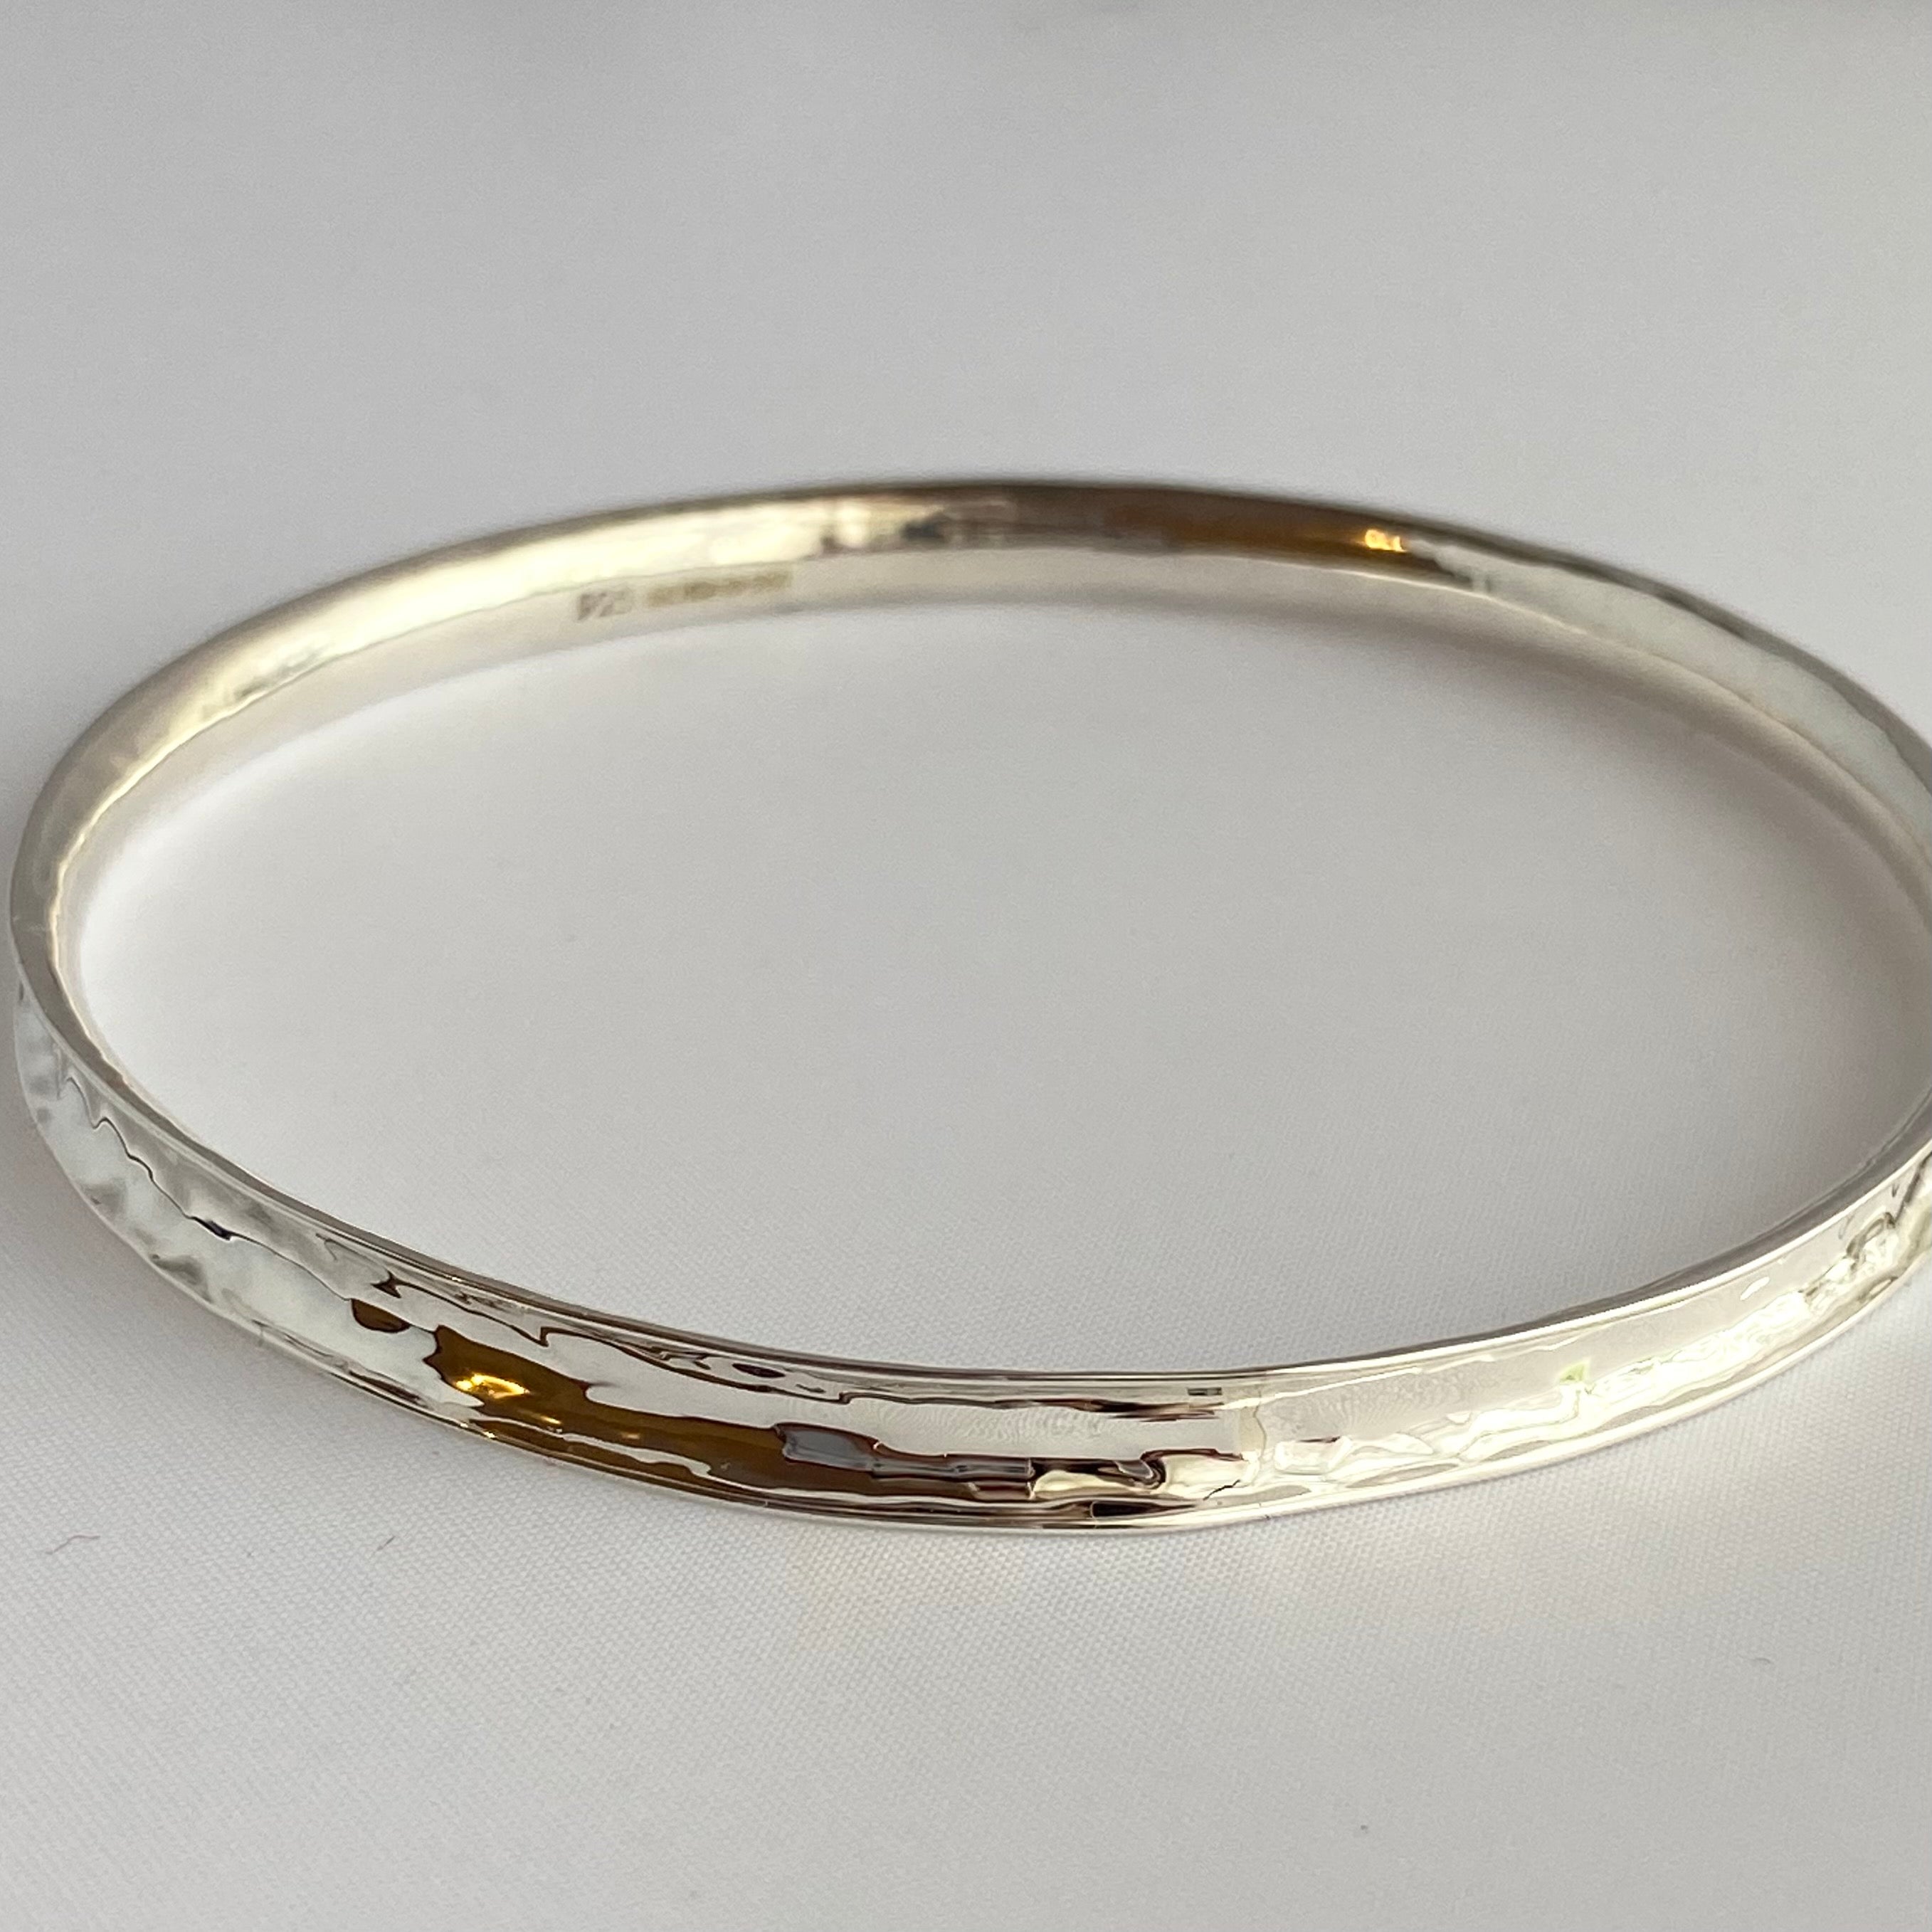 Round Sterling Silver 5mm wide Concave Bangle with a Hammered Finish